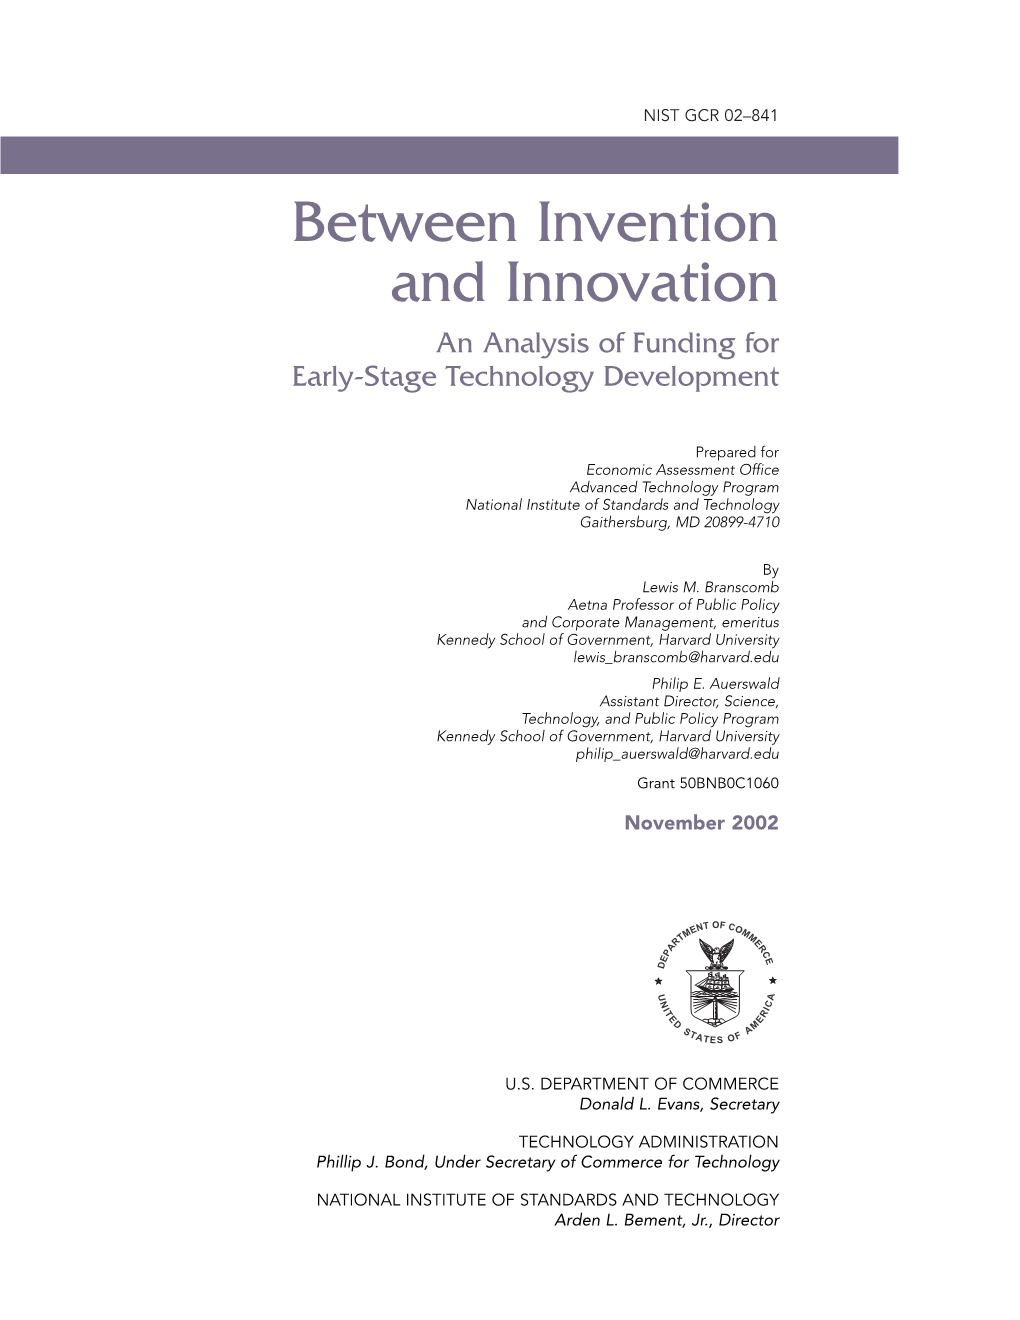 Between Invention and Innovation an Analysis of Funding for Early-Stage Technology Development